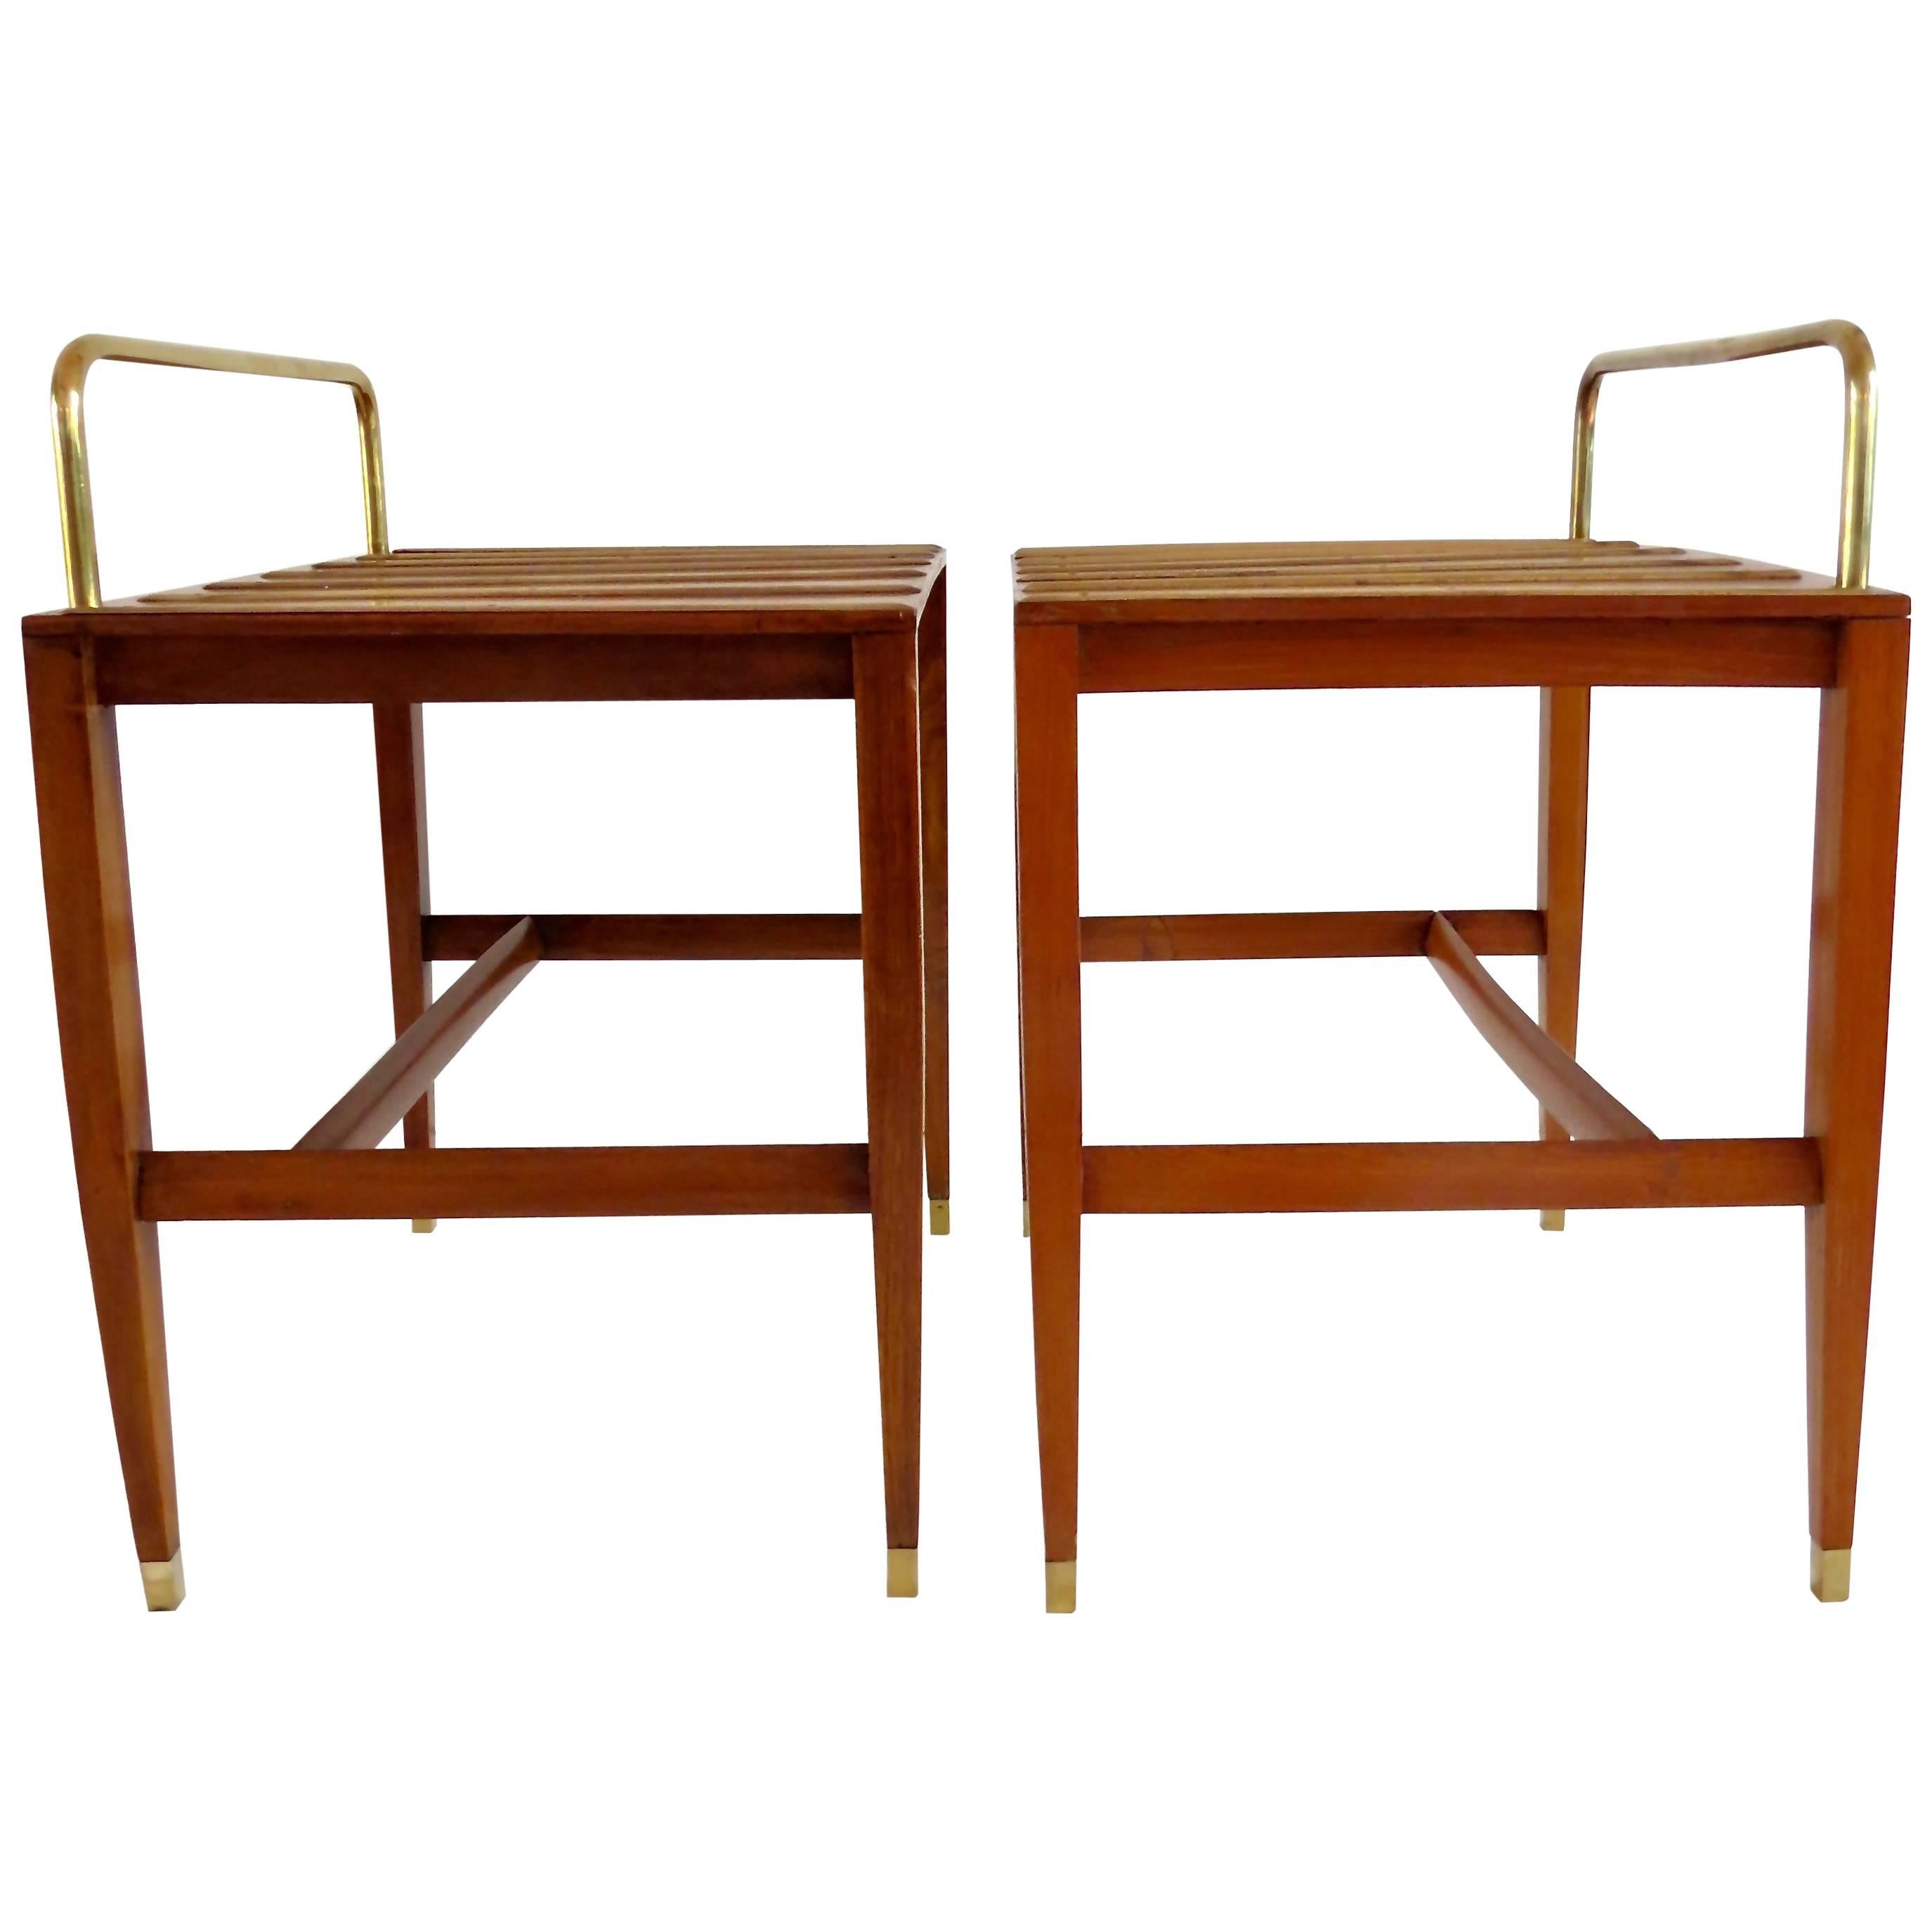 Pair of Gio Ponti Side Tables from Hotel Royal, Naples, 1955